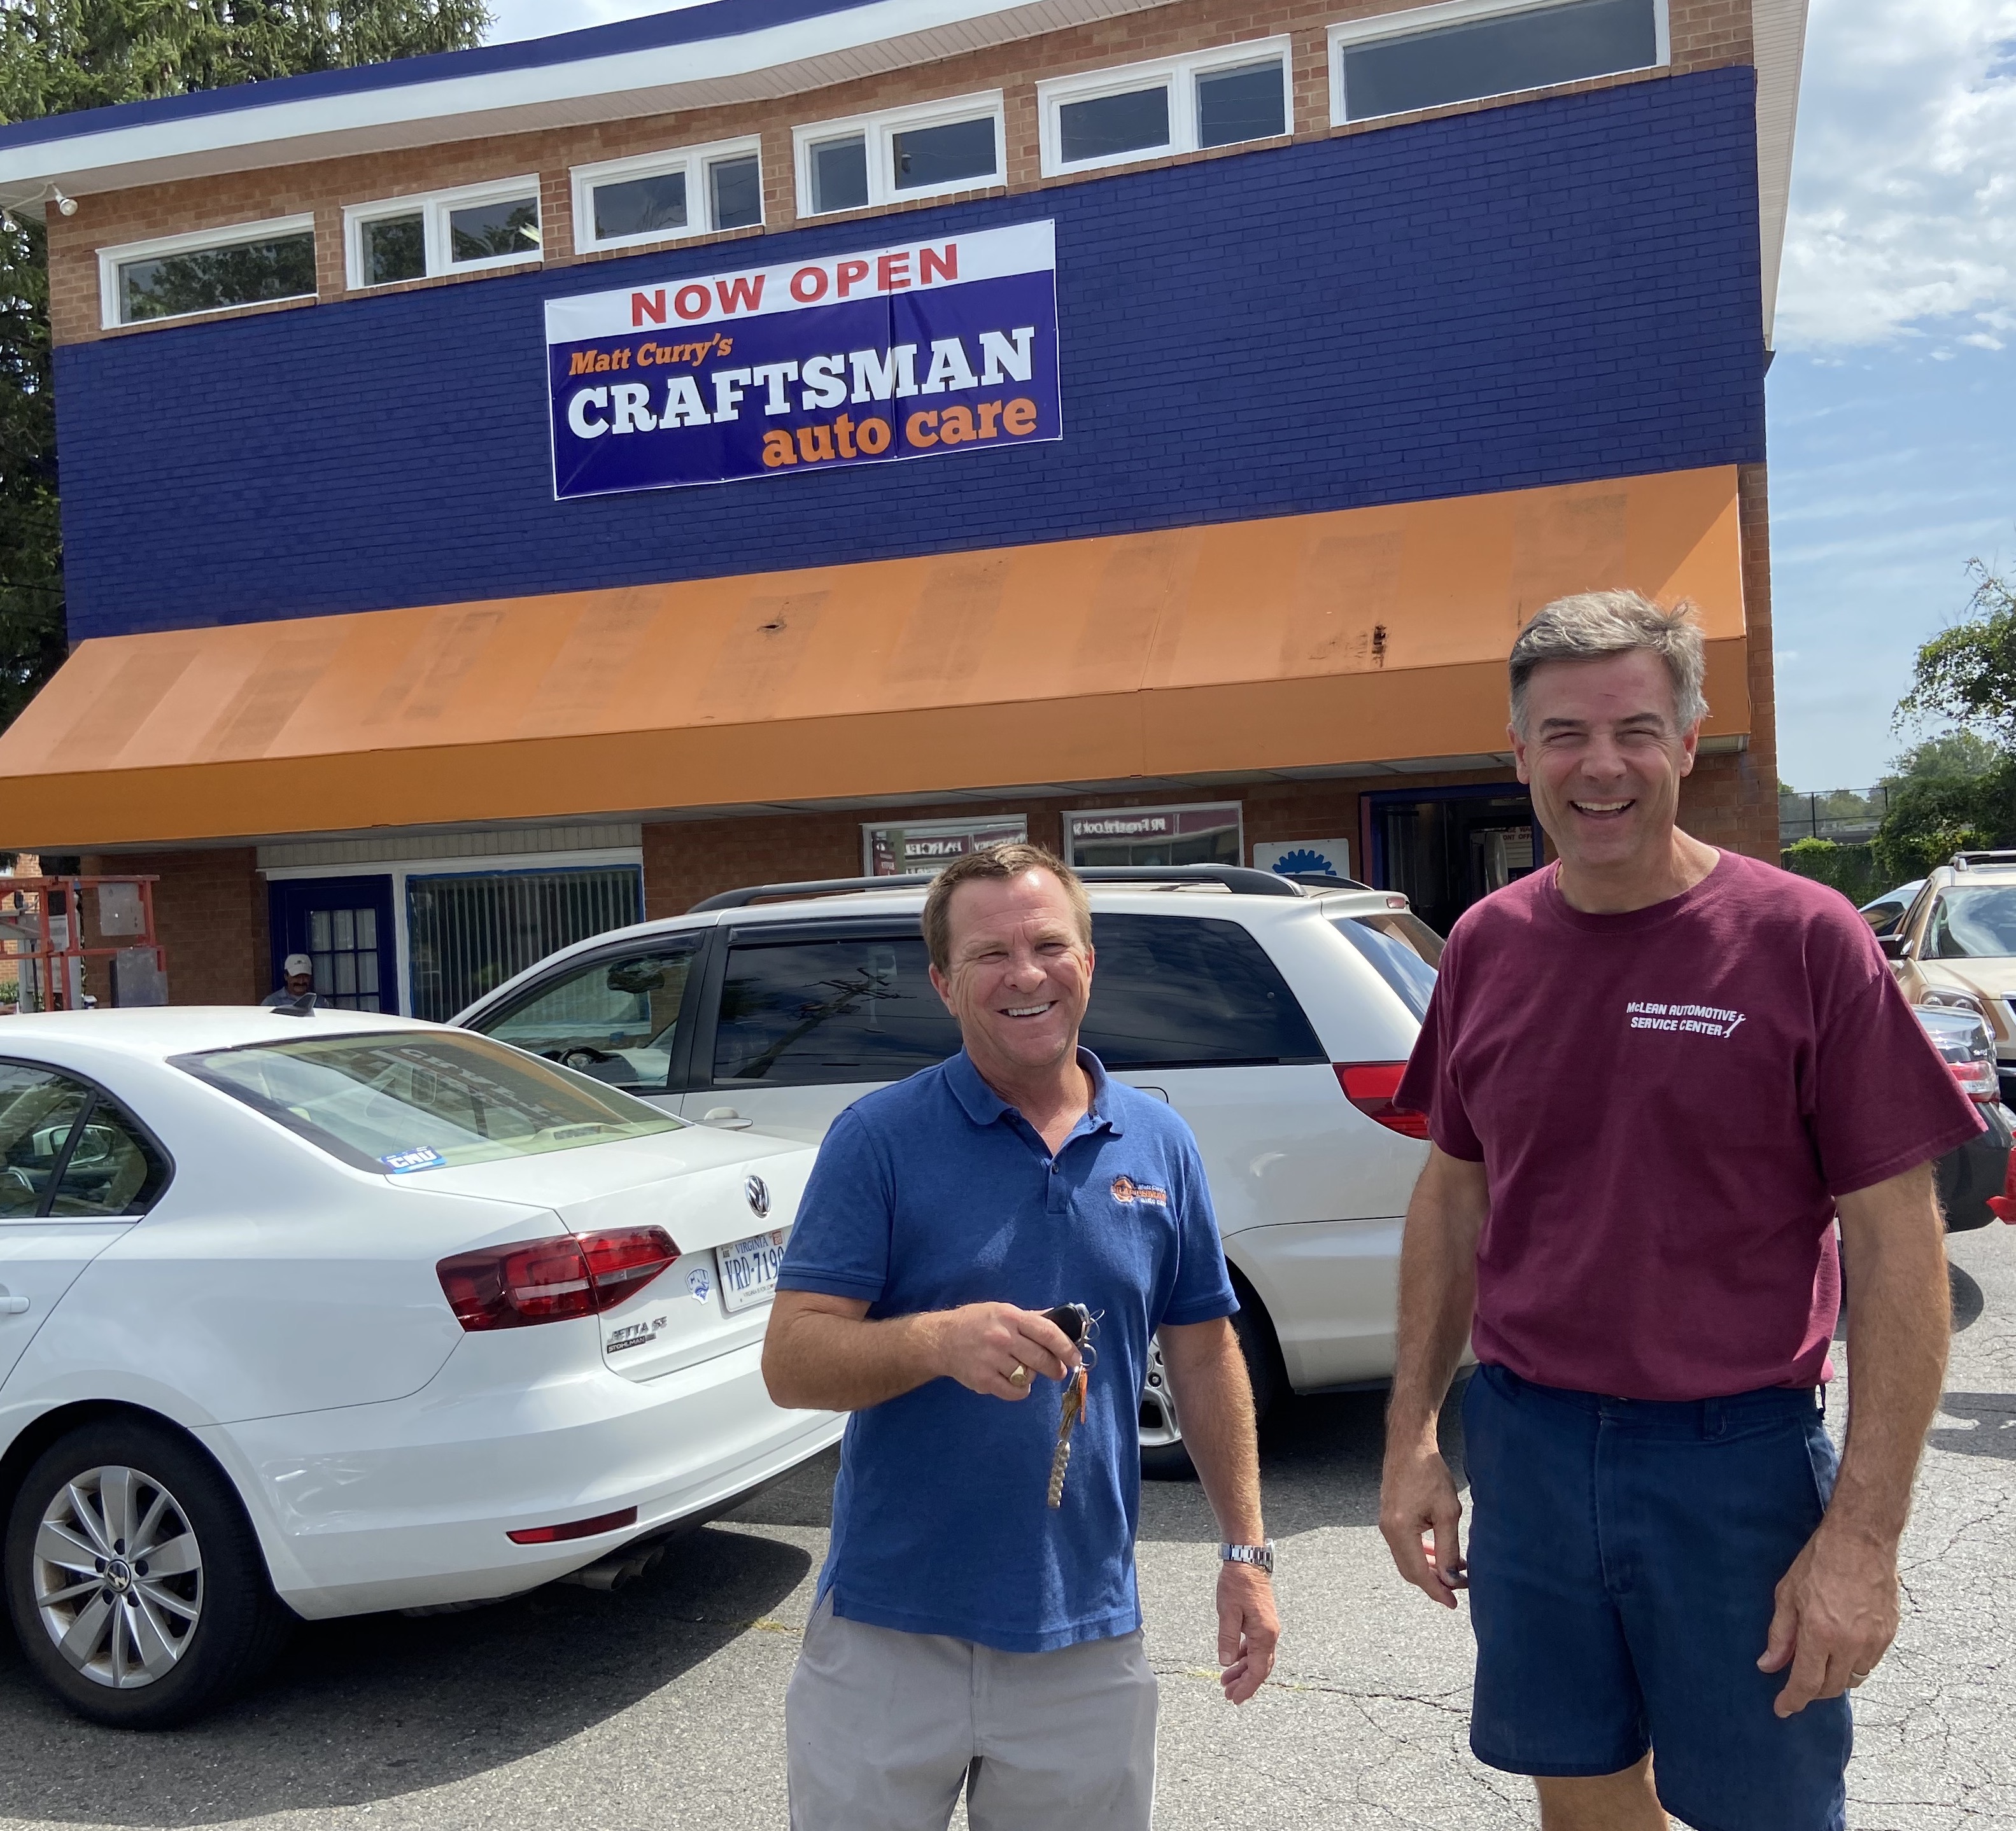 Carrying on the traditions at Mclean Automotive Service